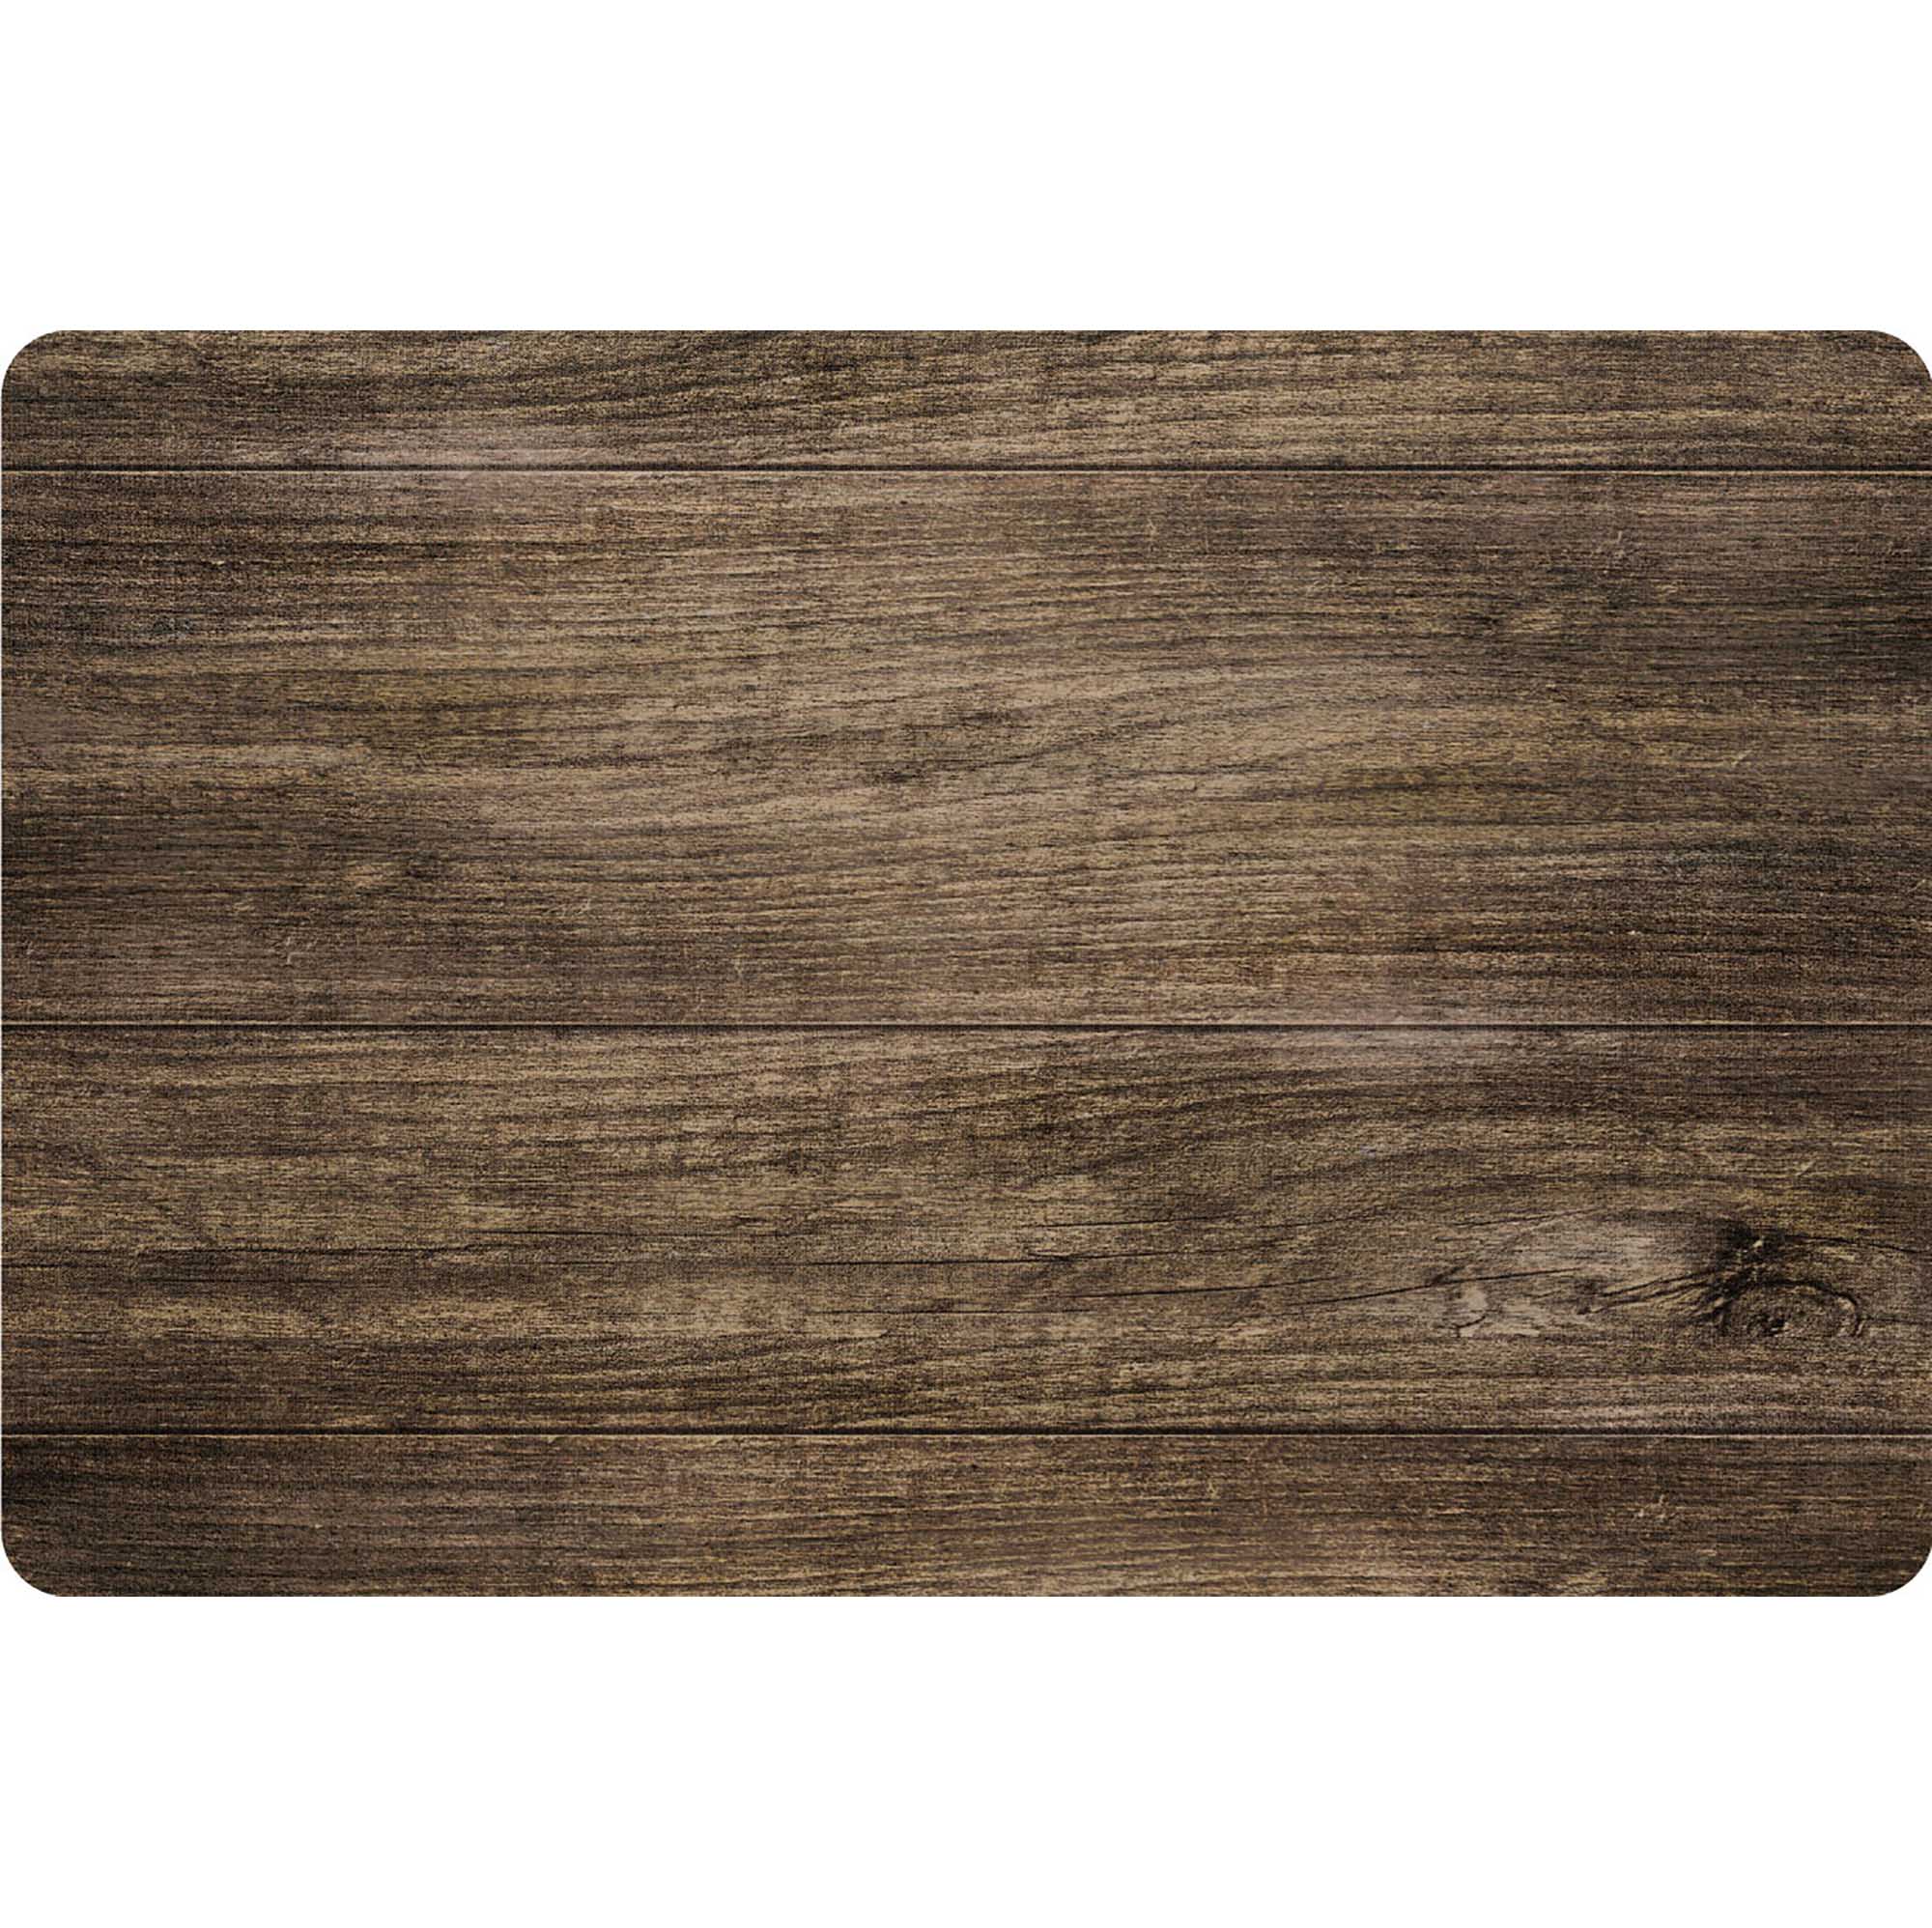 Wood Look Printed Chocolate Placemat 17x11.2in